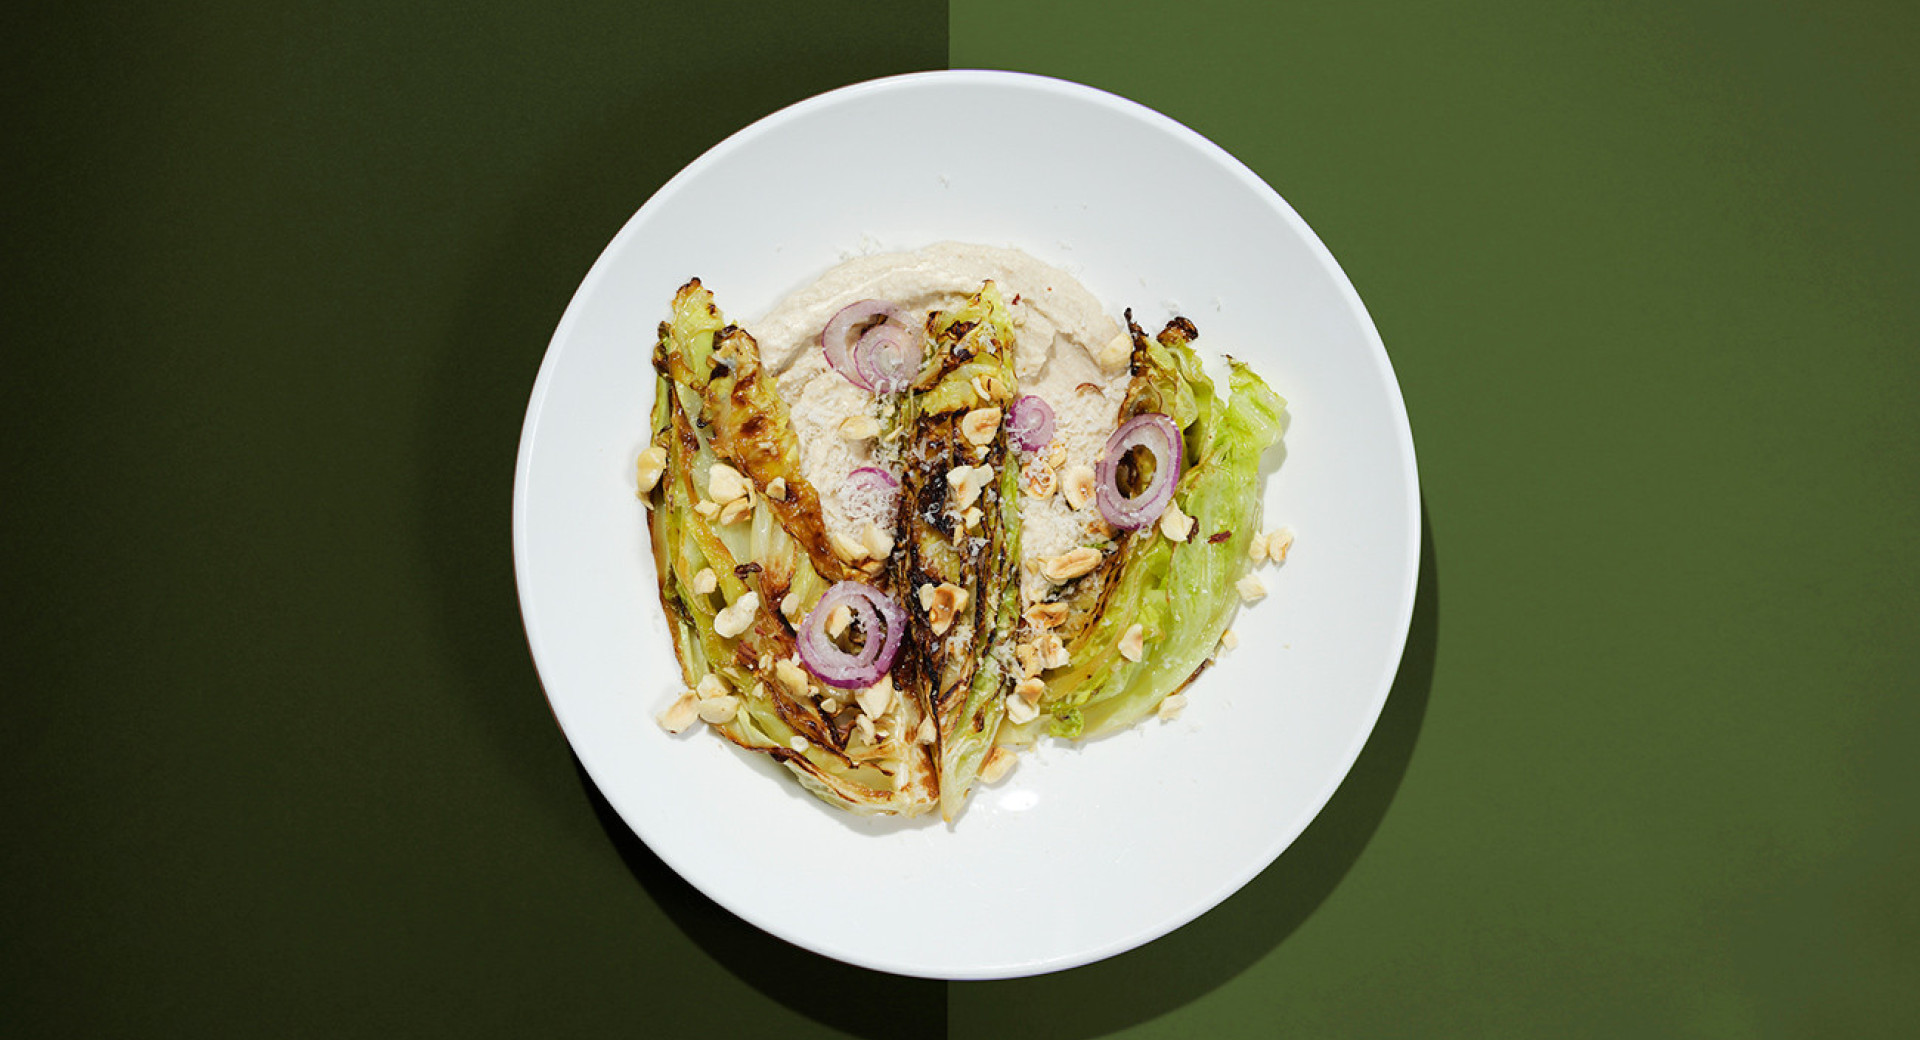 A white plate on a light and dark green base. On the plate, there are roasted cabbage leaves, garnished with slices of onion and sprinkled with hazelnuts.